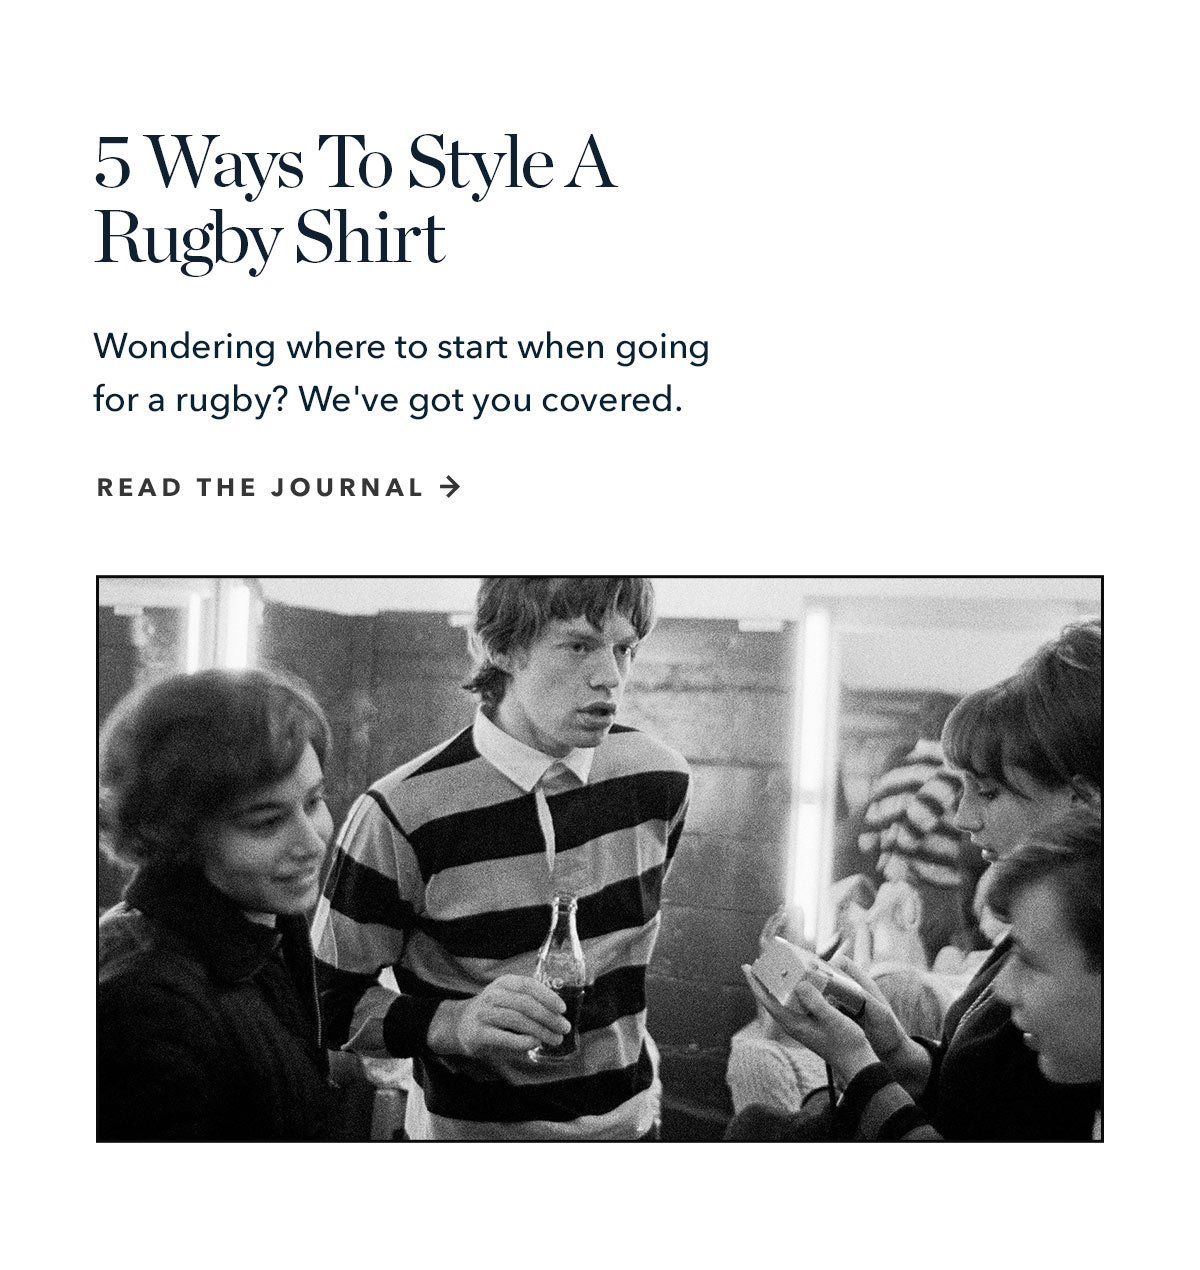 10 Ways To Style A Rugby Shirt: Wondering where to start when styling a Rugby Shirt? We've got you covered ten times over.